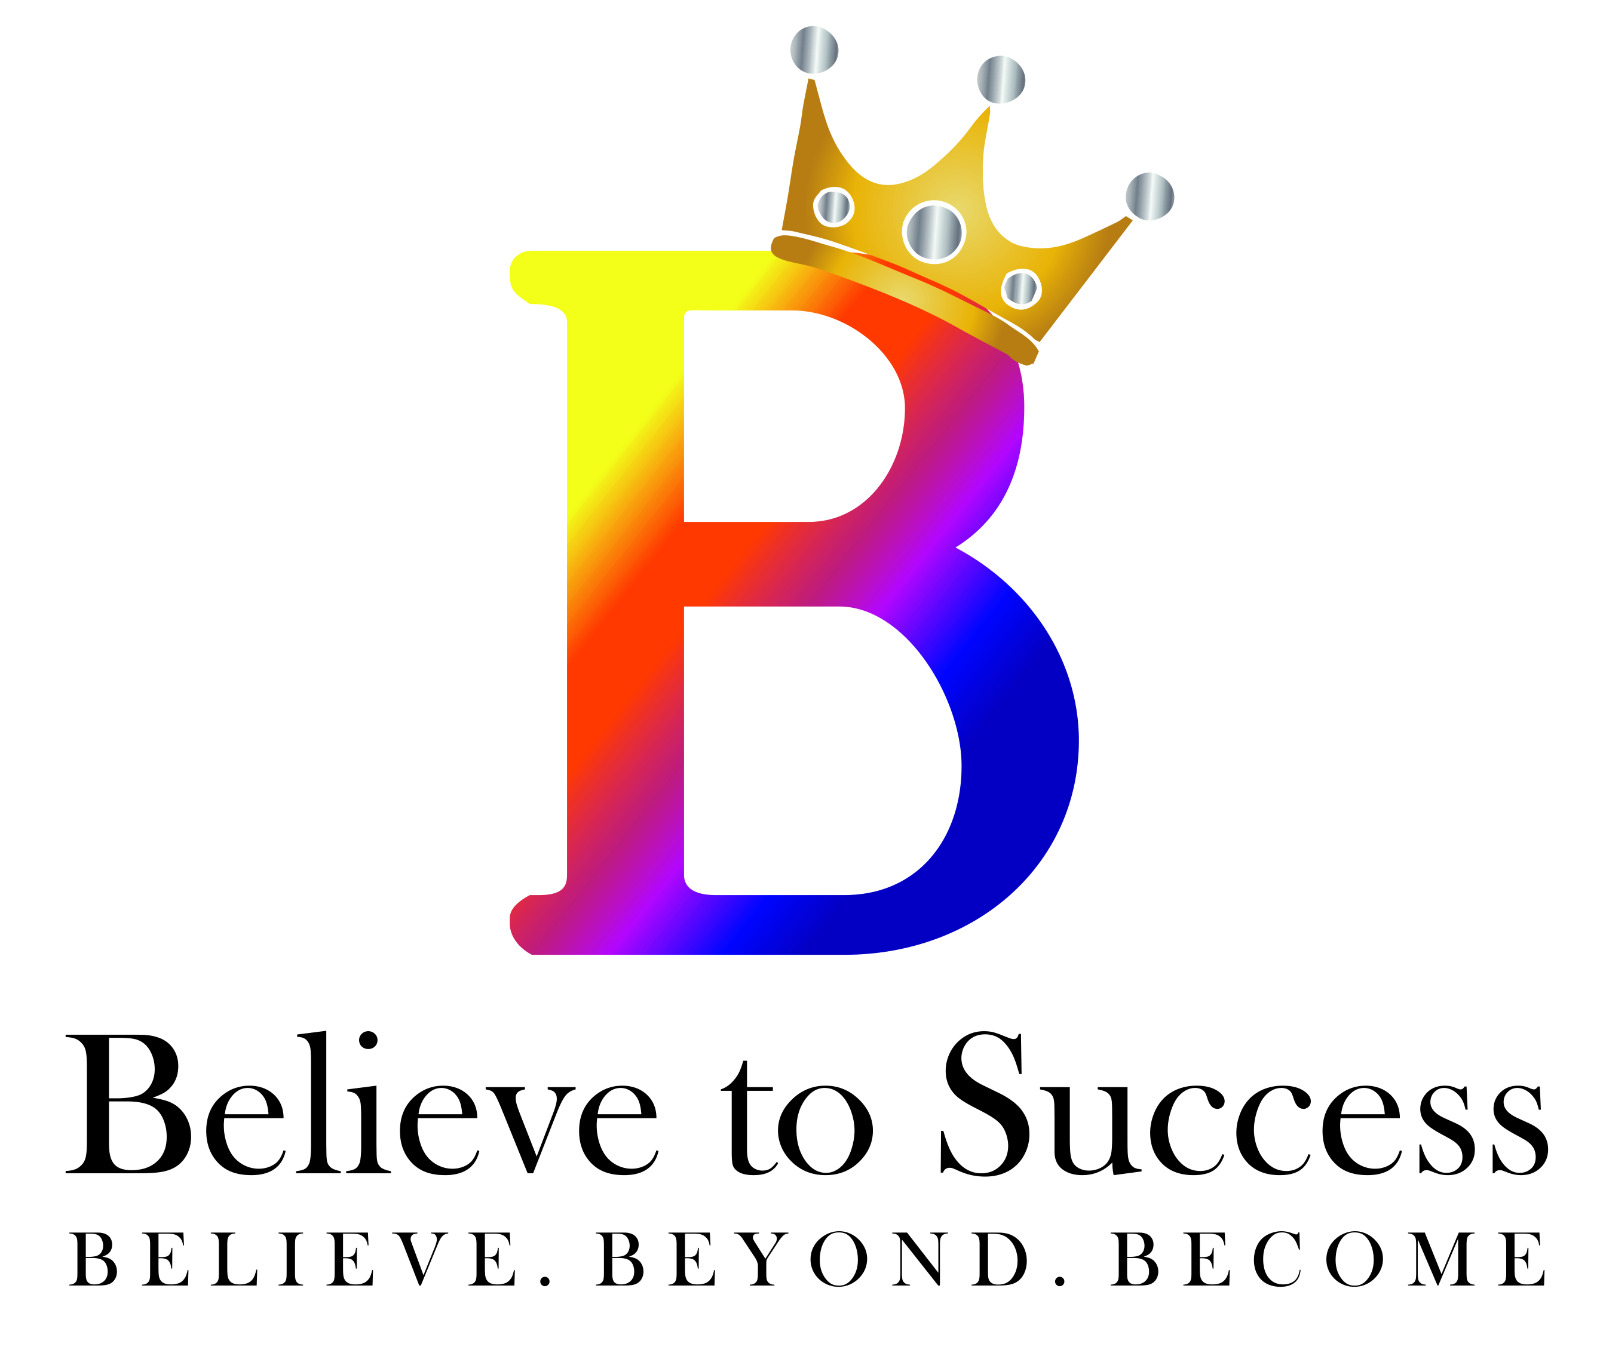 Believe To Success ~ brings out the best in you